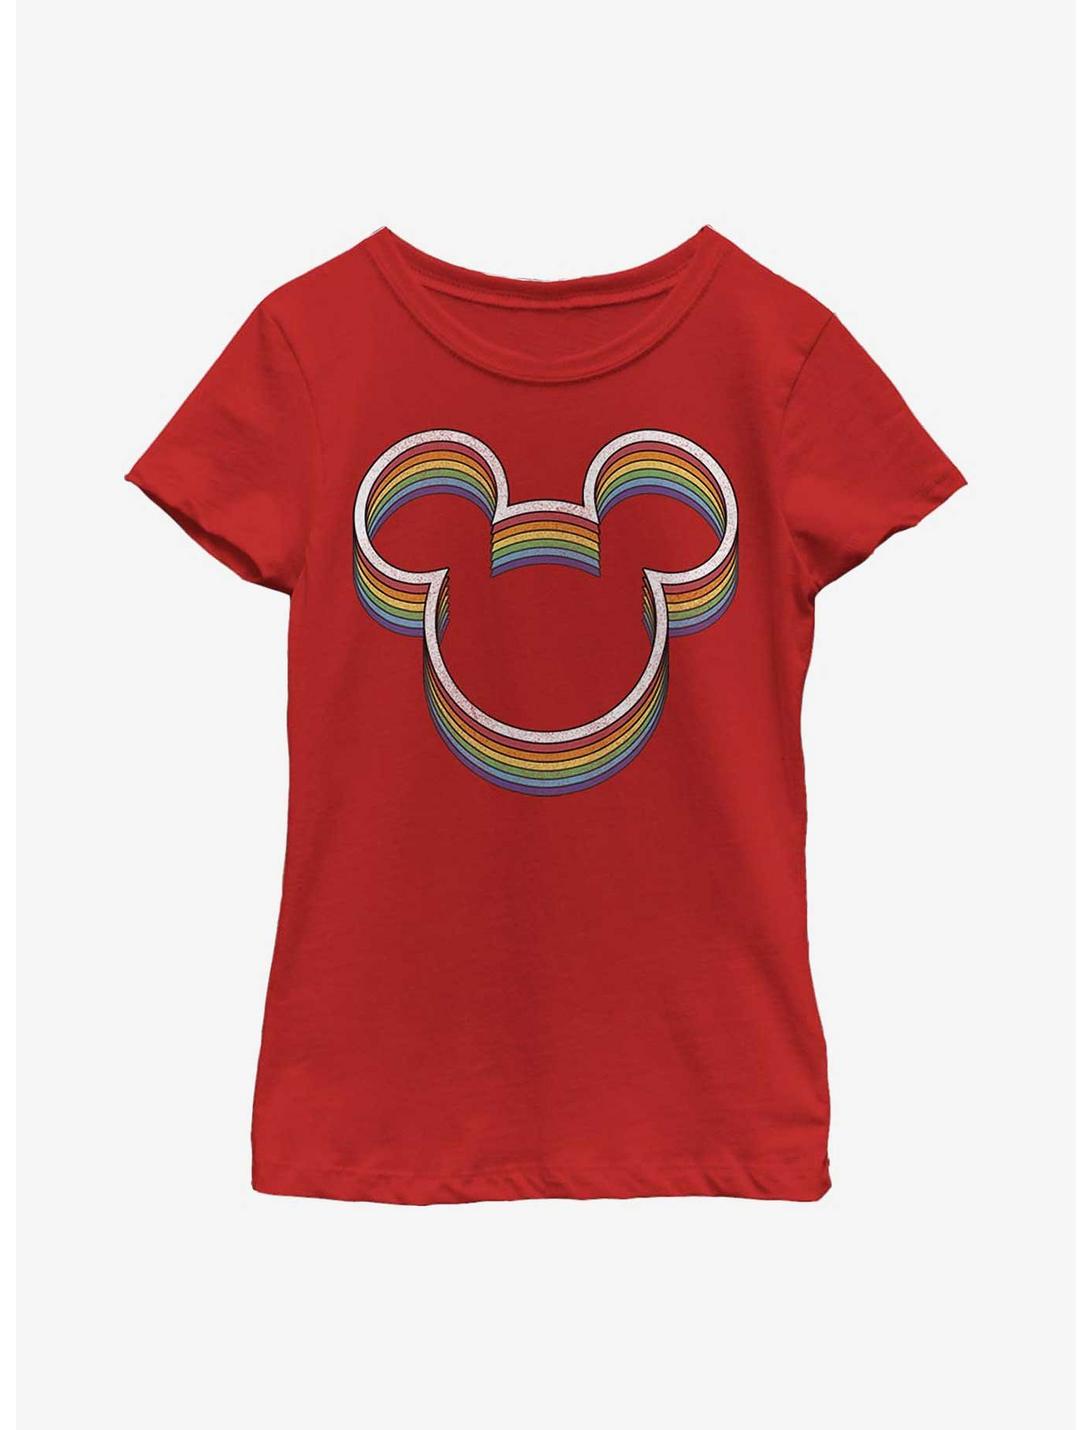 Disney Mickey Mouse Rainbow Ears Youth Girls T-Shirt, RED, hi-res